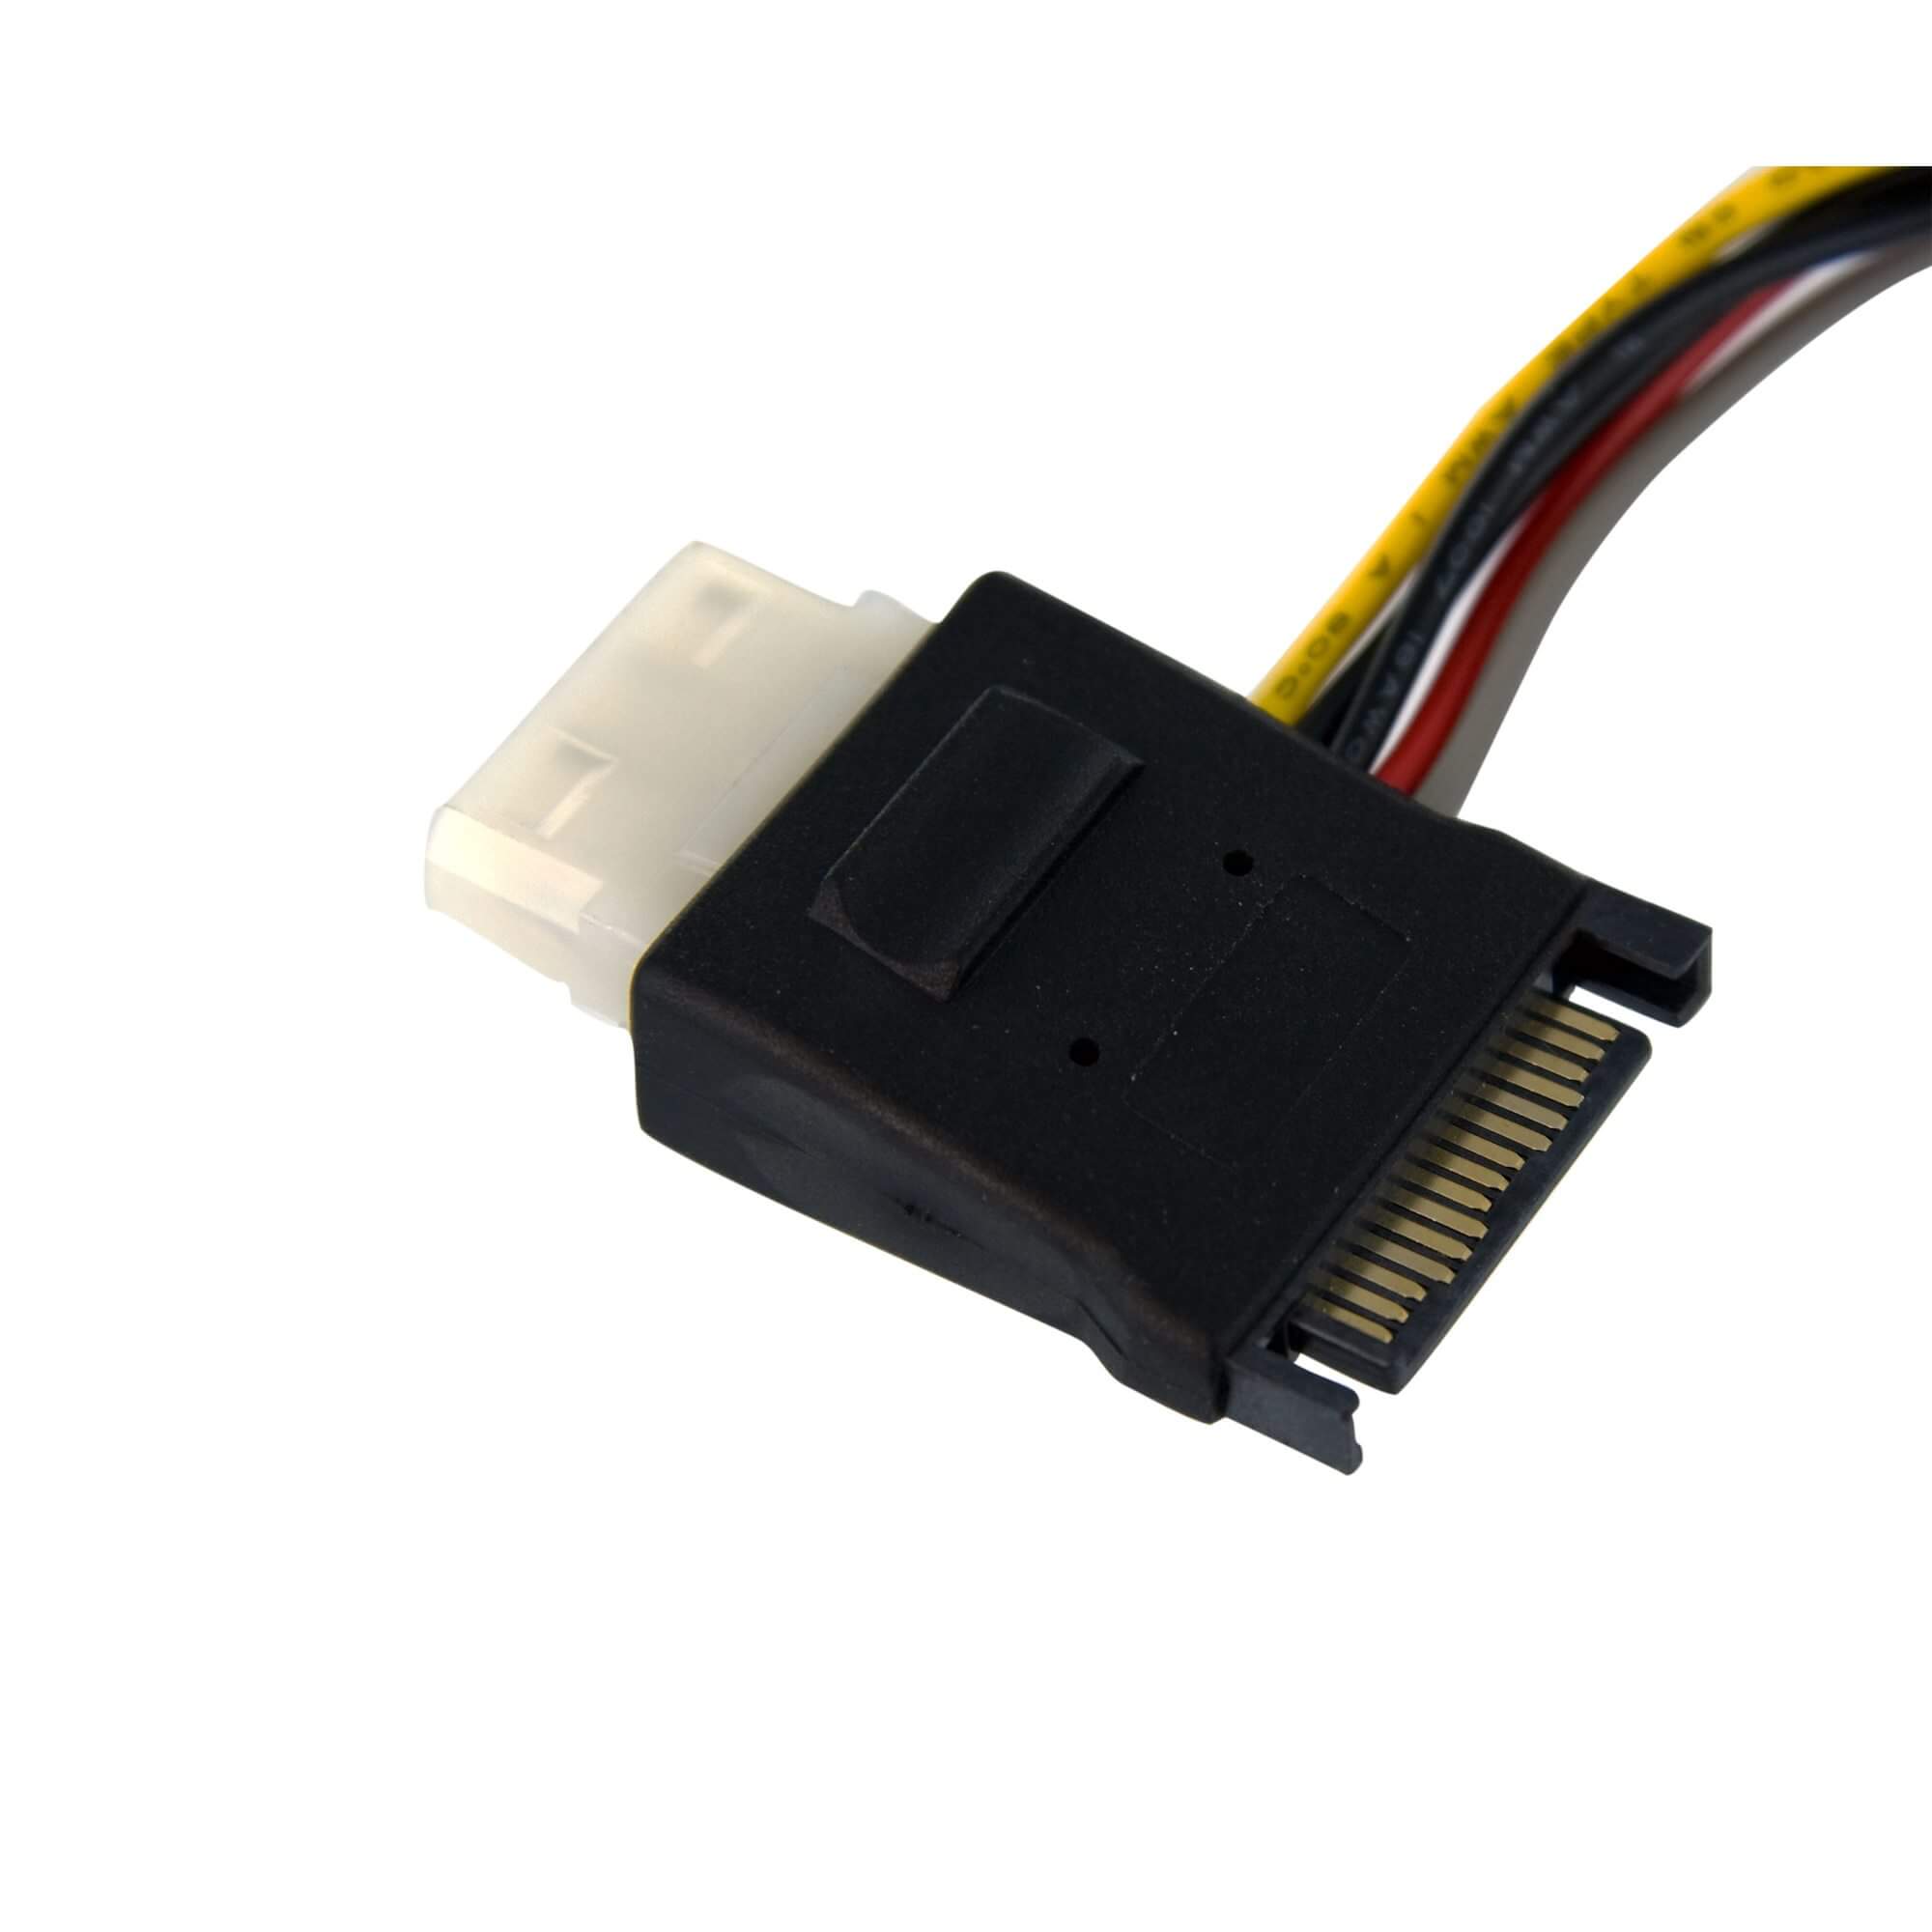 Cable splitter SATA to LP4 with 2x SATA Power Splitter Cable -3